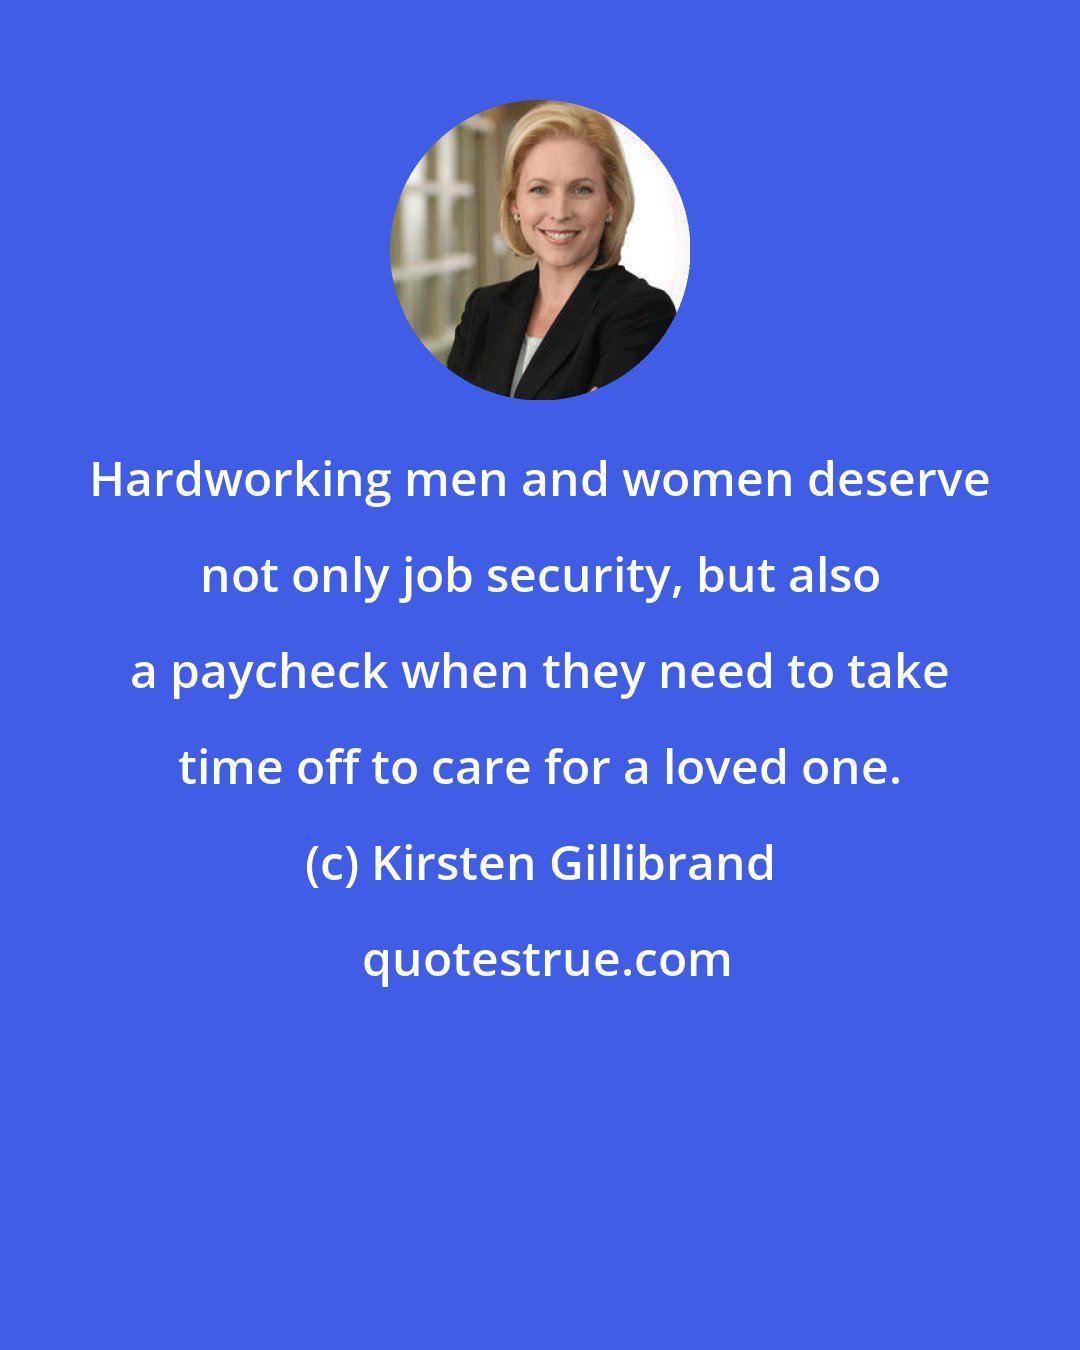 Kirsten Gillibrand: Hardworking men and women deserve not only job security, but also a paycheck when they need to take time off to care for a loved one.